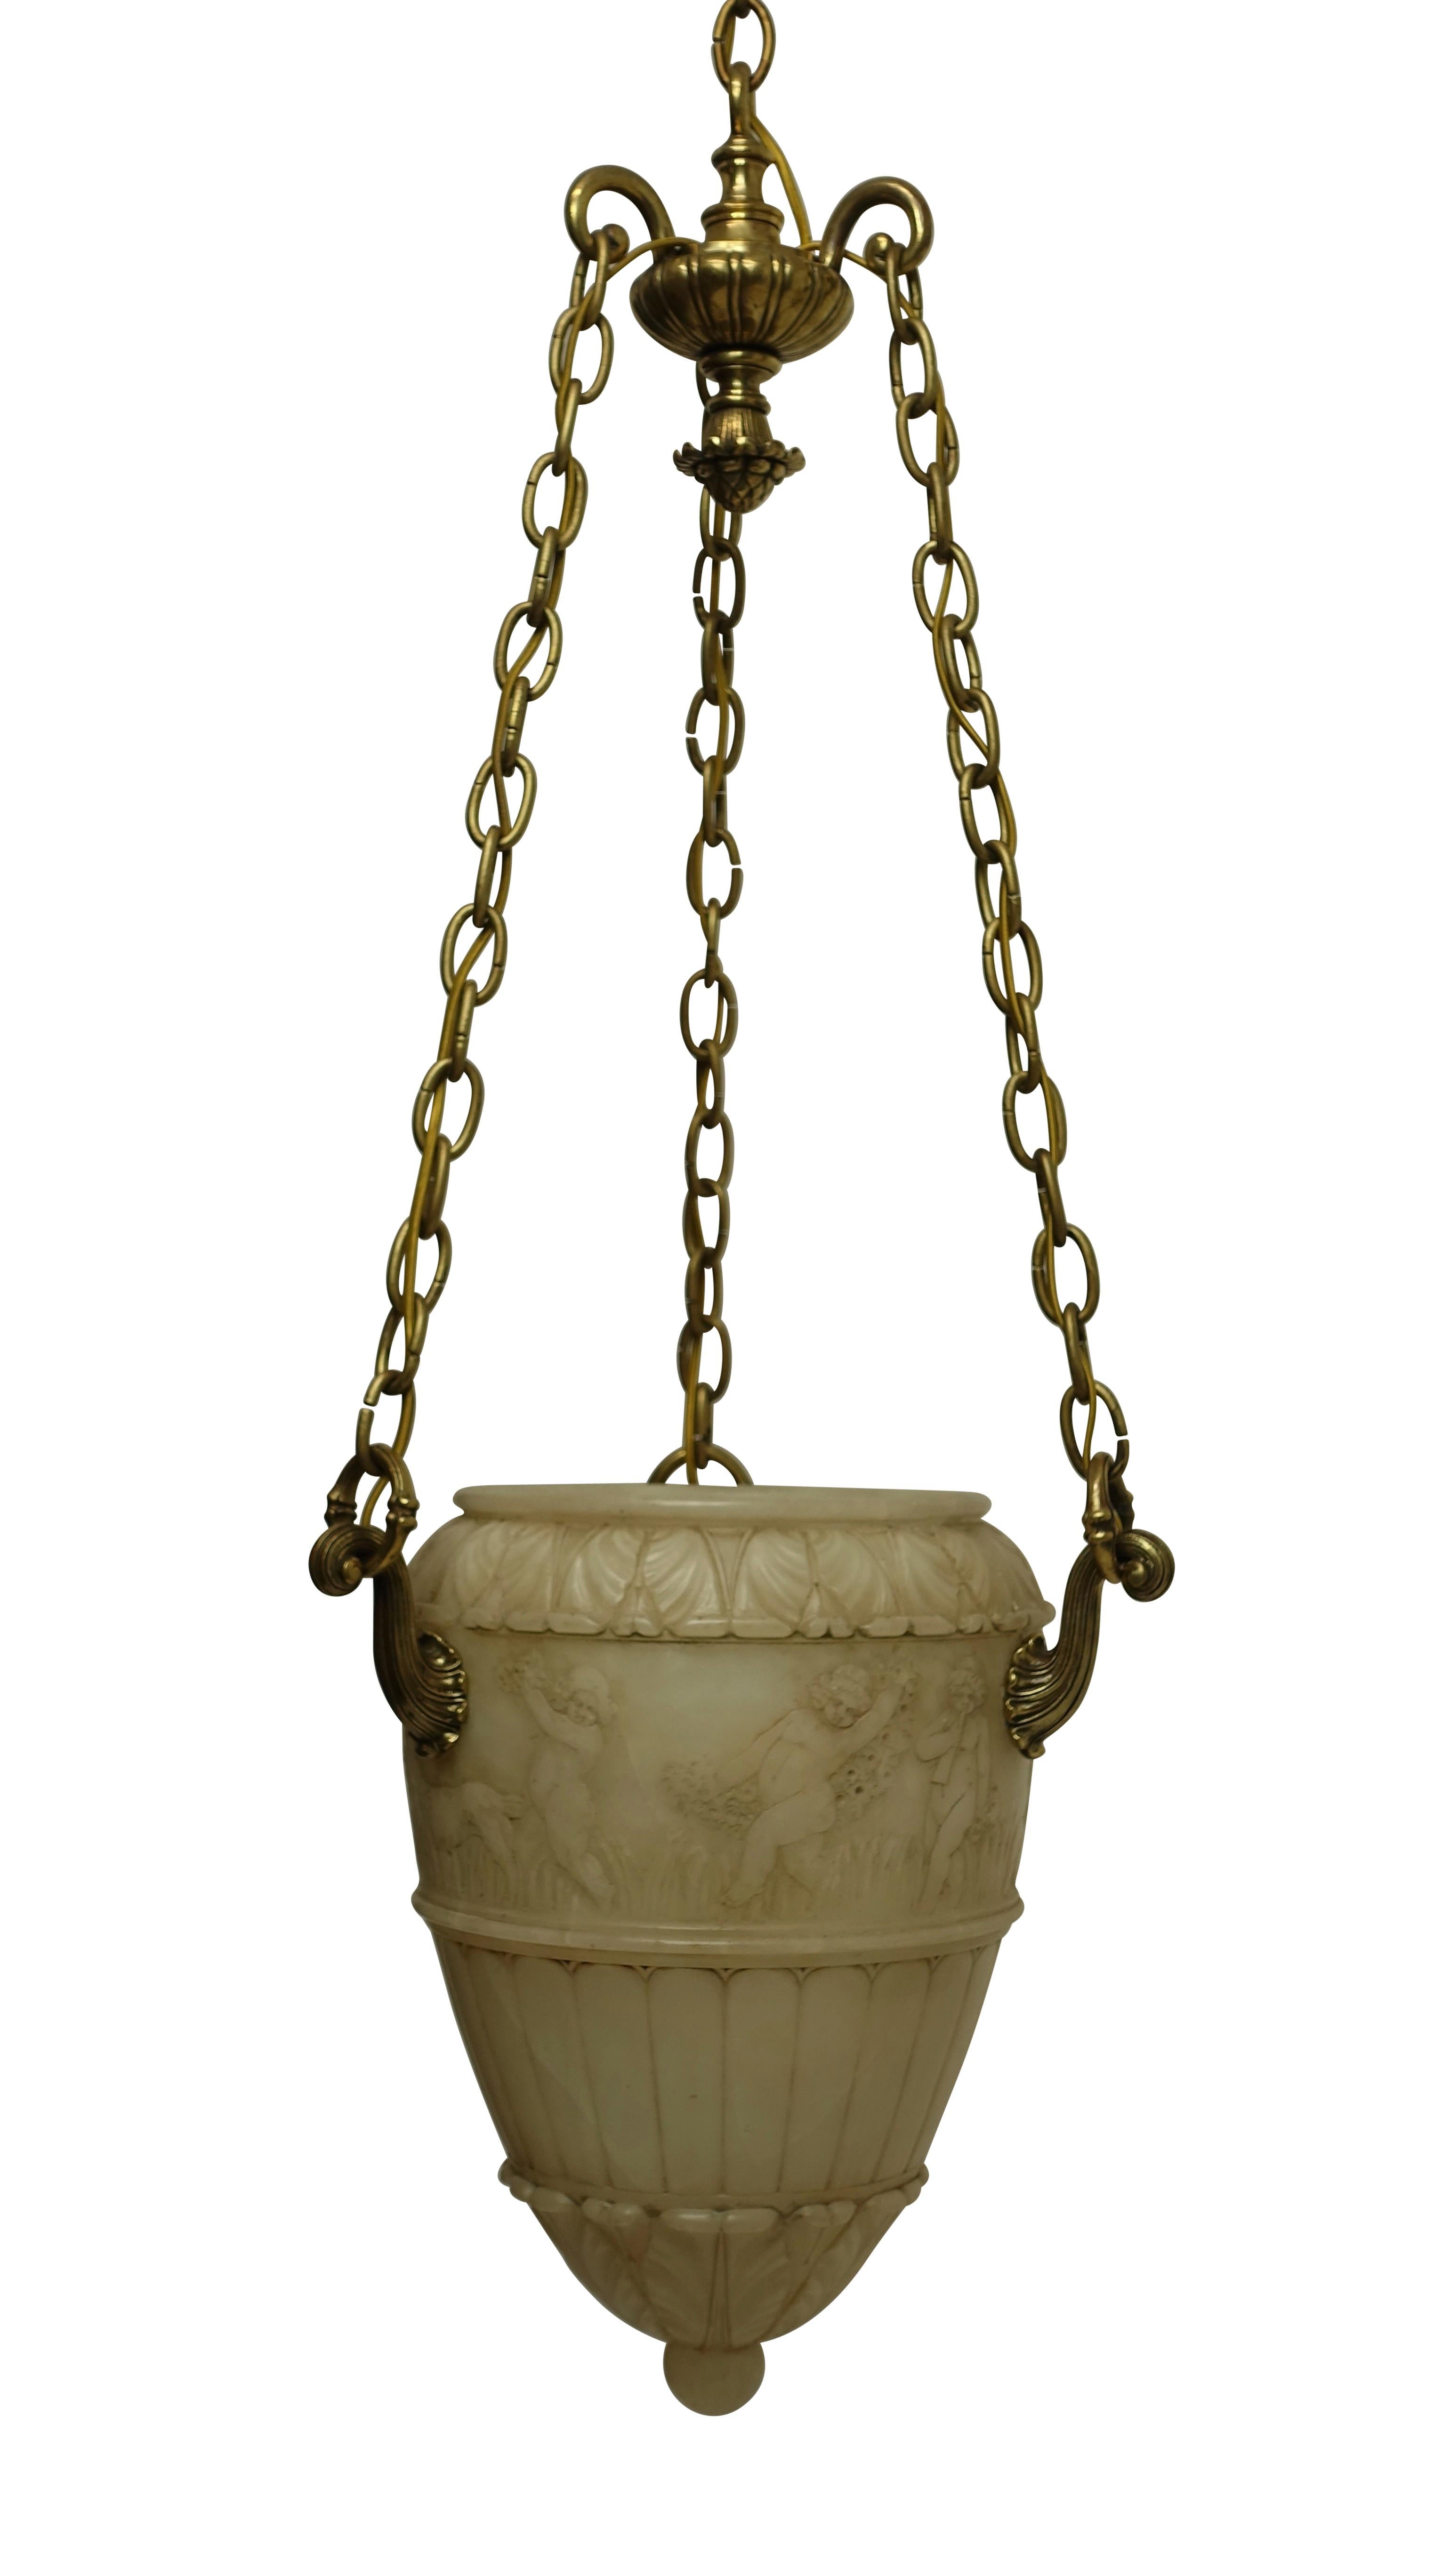 Neoclassical Carved Alabaster Pendant Light Fixture with Brass Hardware, Italian, circa 1910